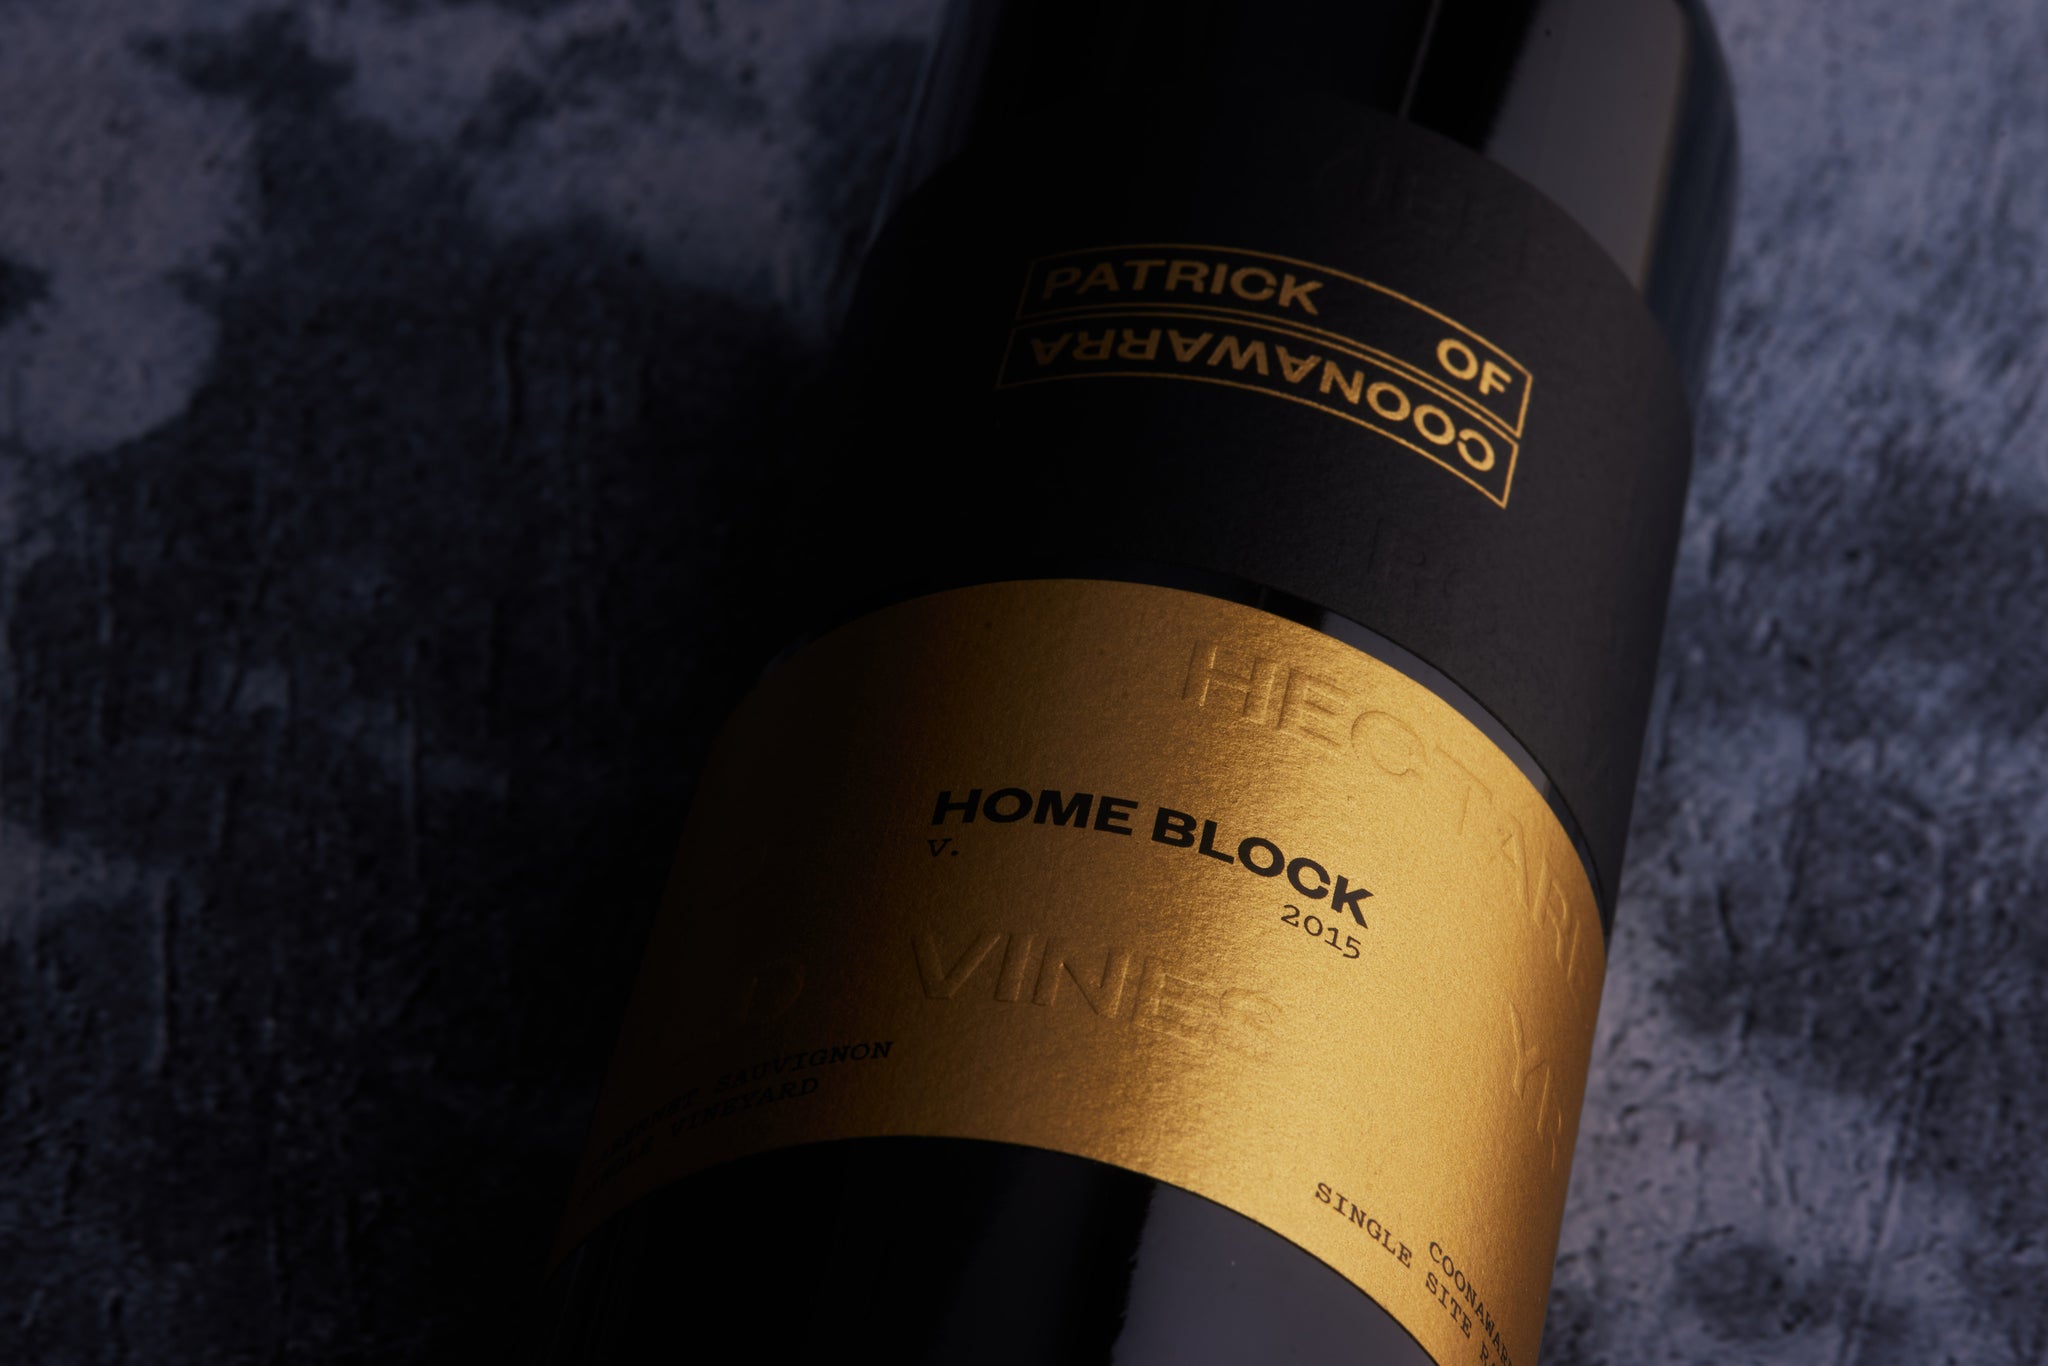 Bottle of red wine zoomed in on the gold embossed label against a dark background.